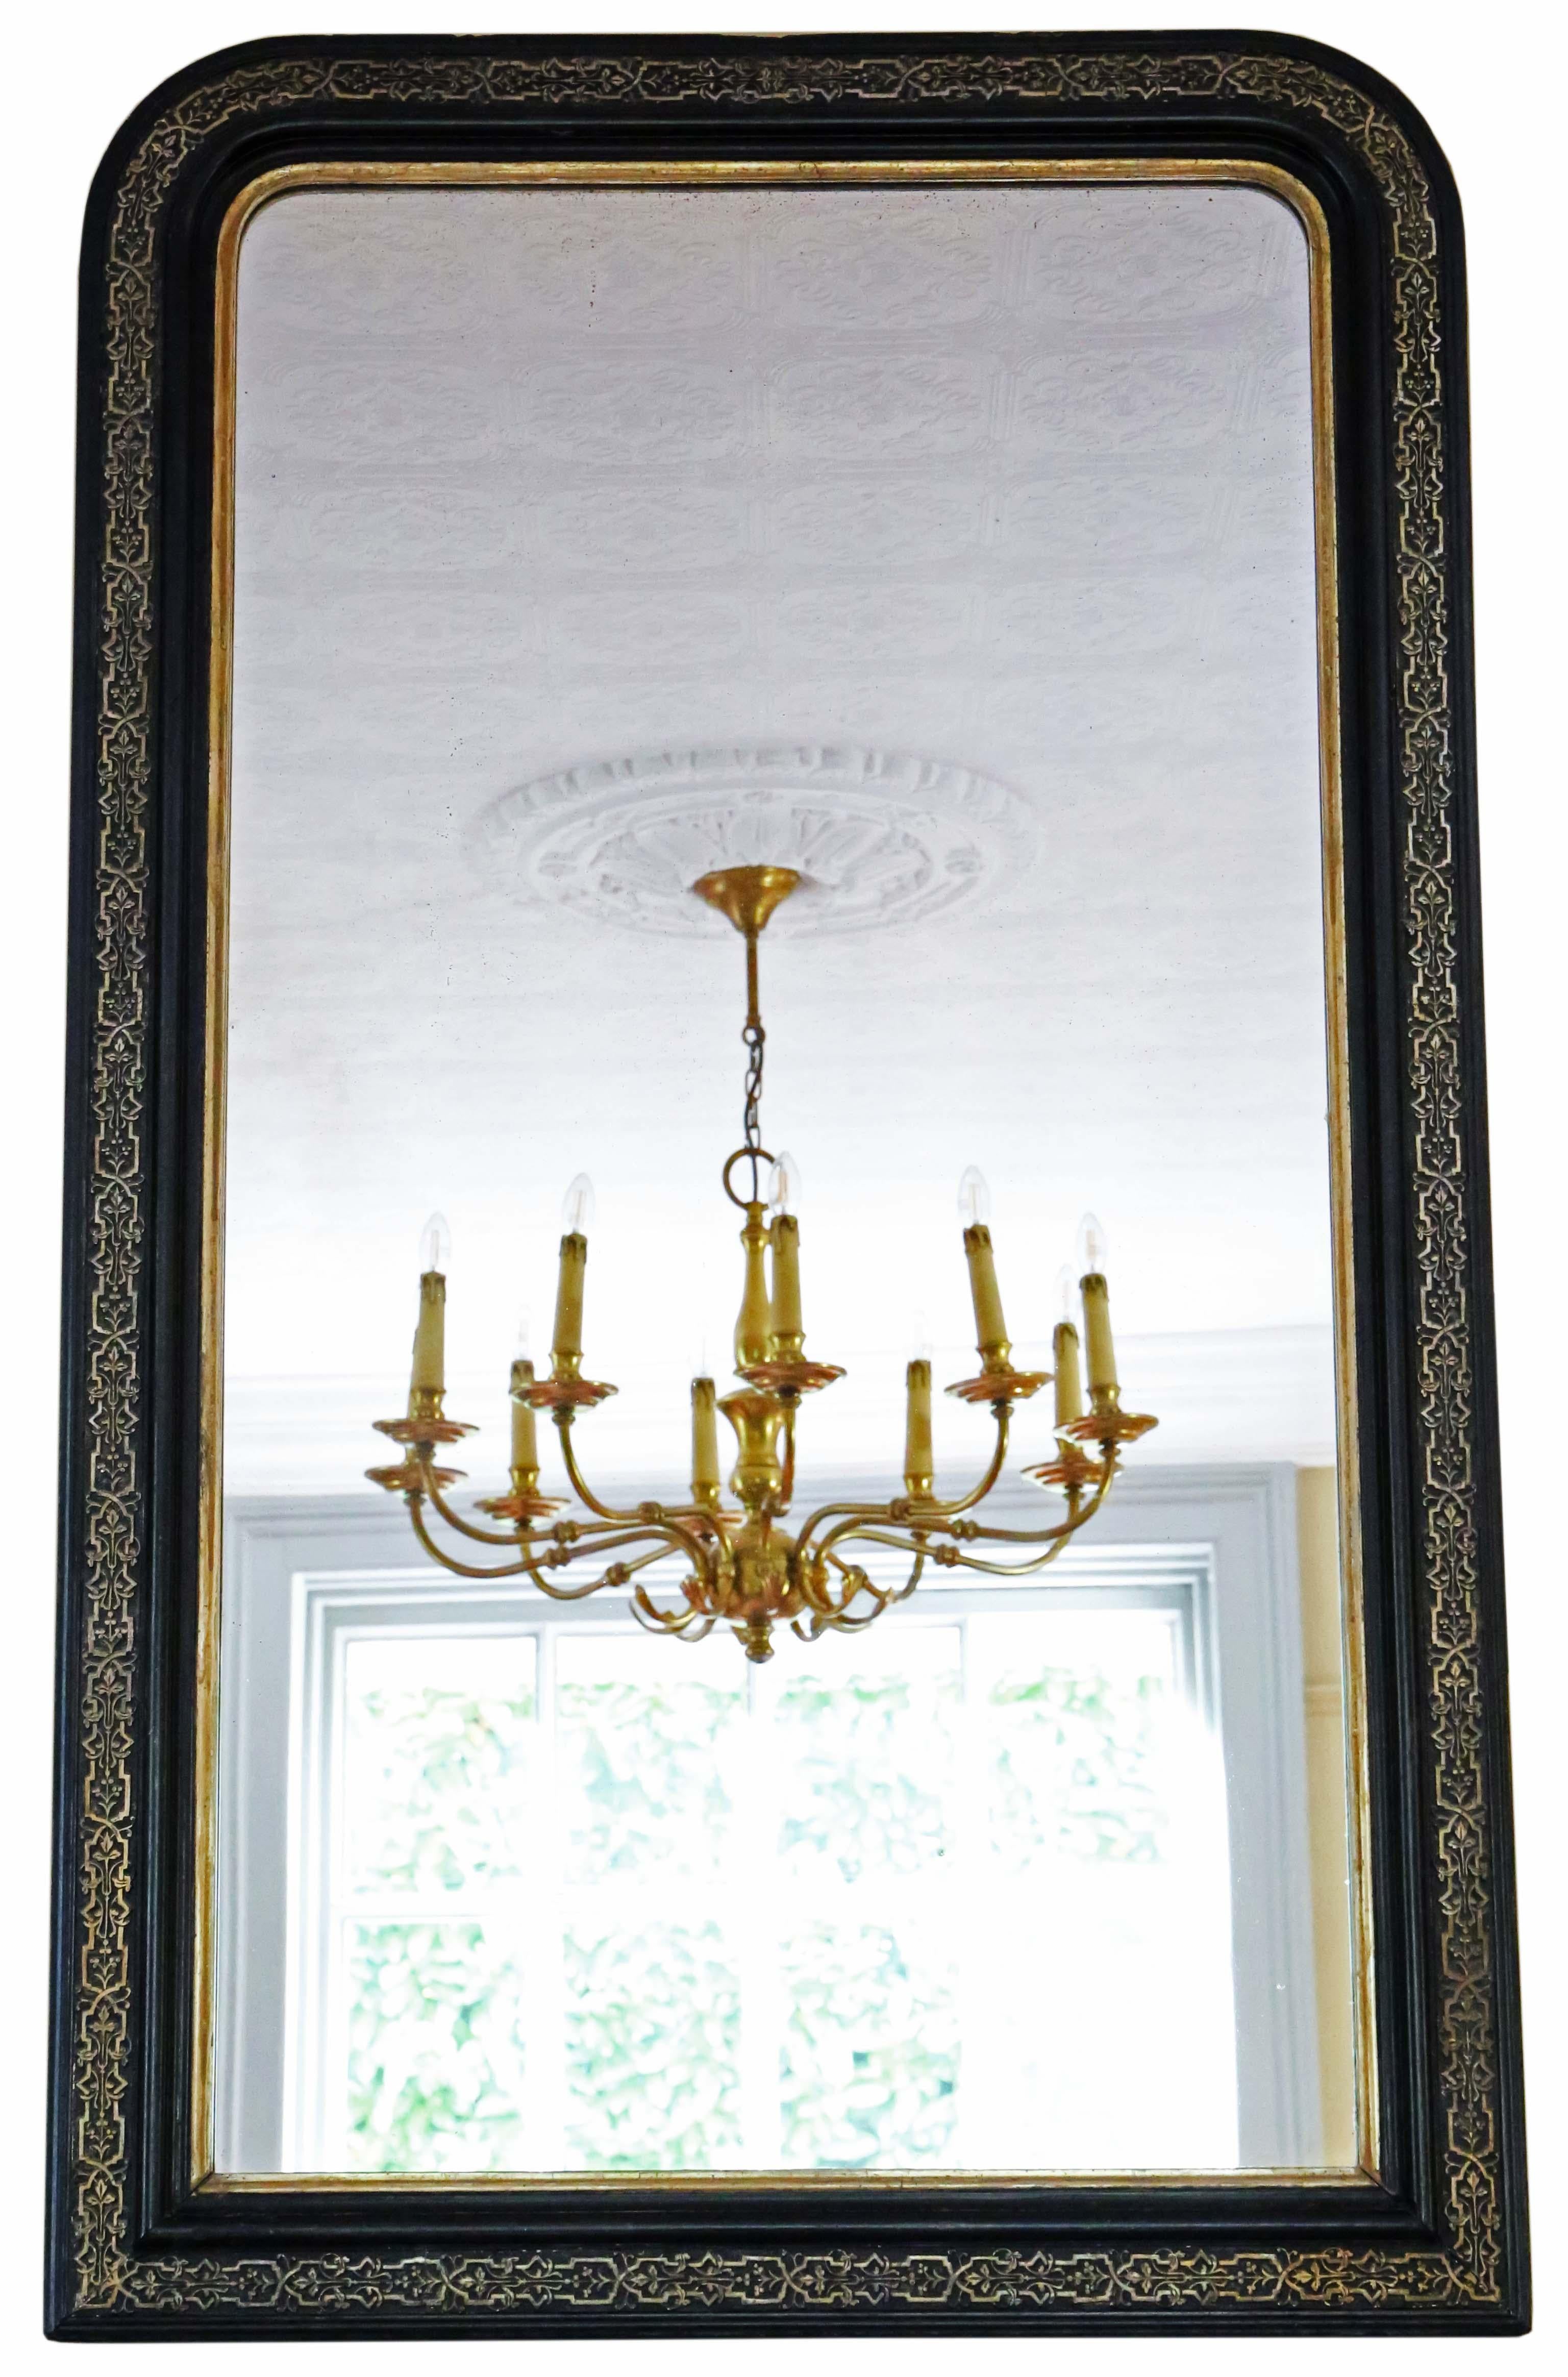 Antique very large 19th Century quality ebonised and gilt overmantle wall mirror. Lovely charm and elegance.

This is a lovely, rare mirror. A bit different and quite special.

An impressive find, that would look amazing in the right location. No